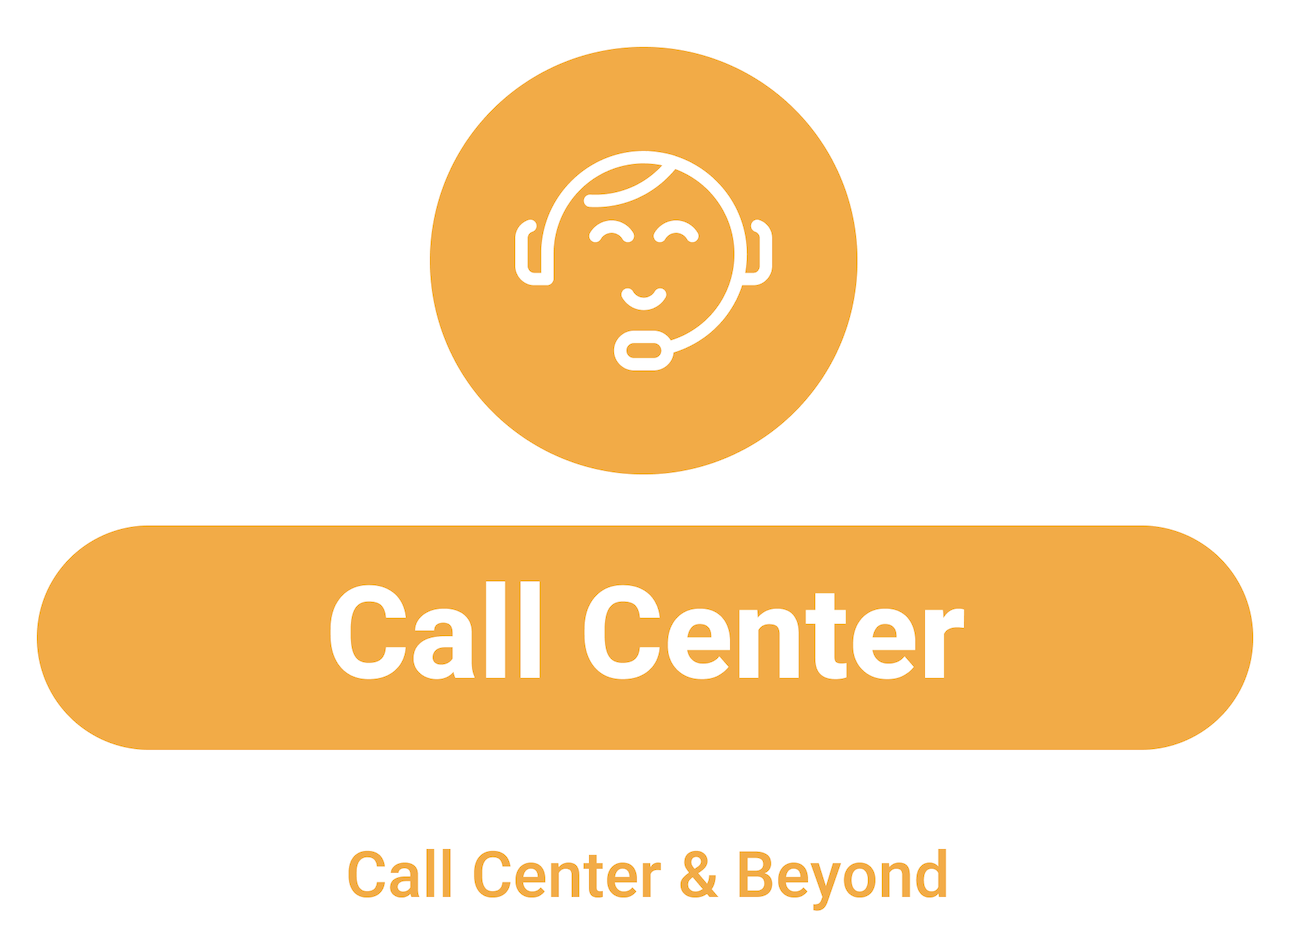 Top 9 Call Center Trends in 2022 - Important Call Center Technology Trends  | Mitel